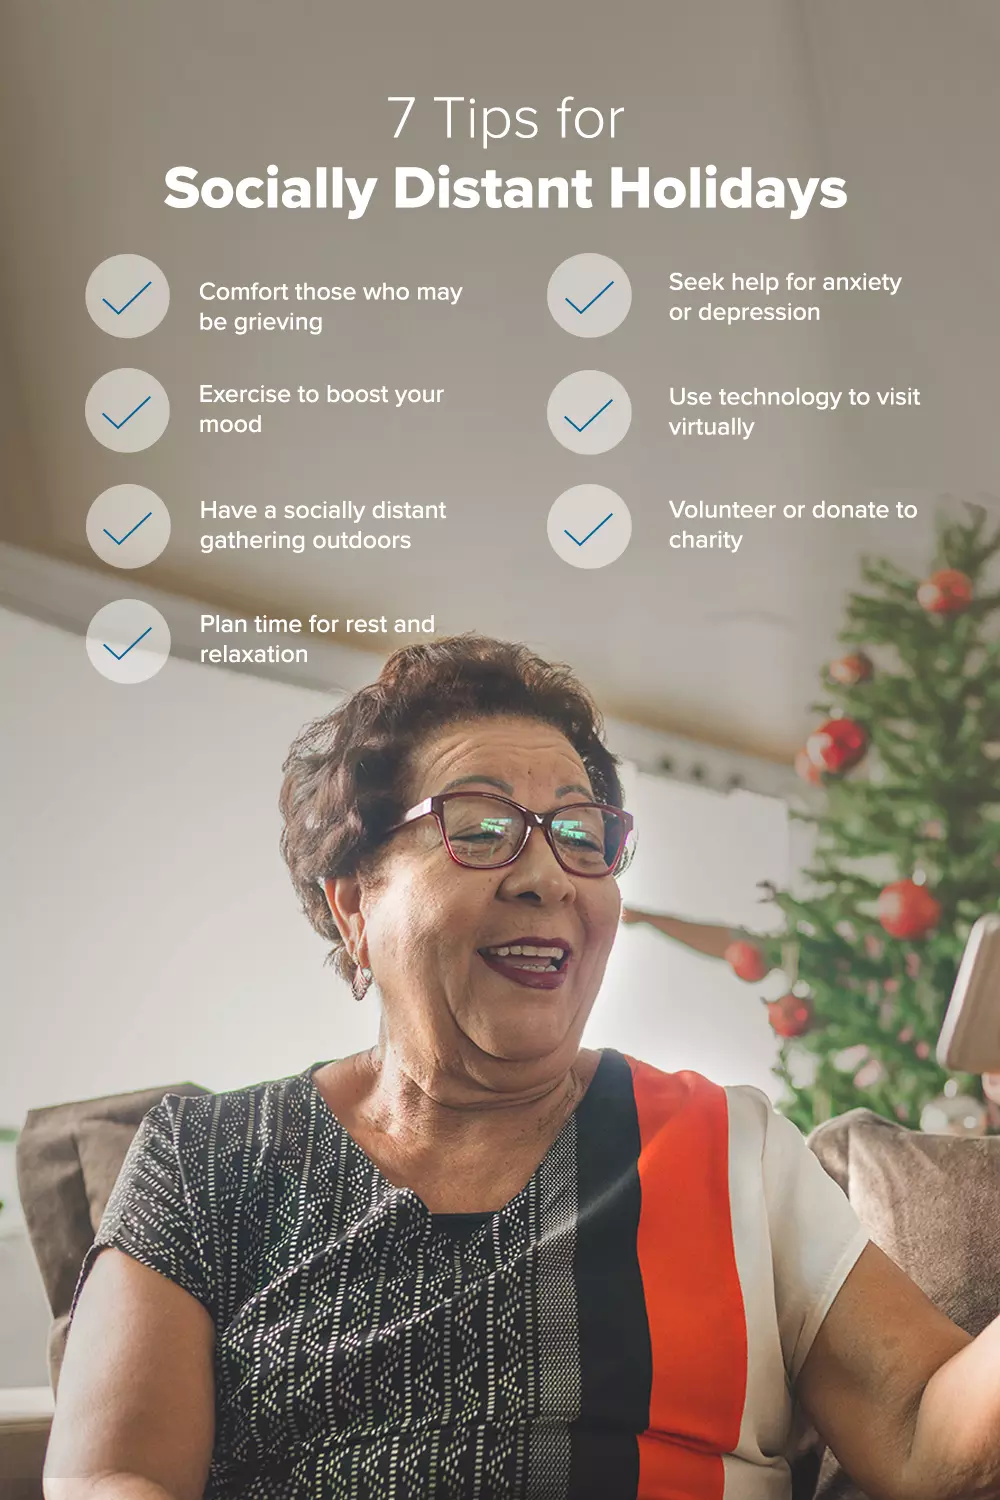 An infographic with 7 tips for socially distant holidays.